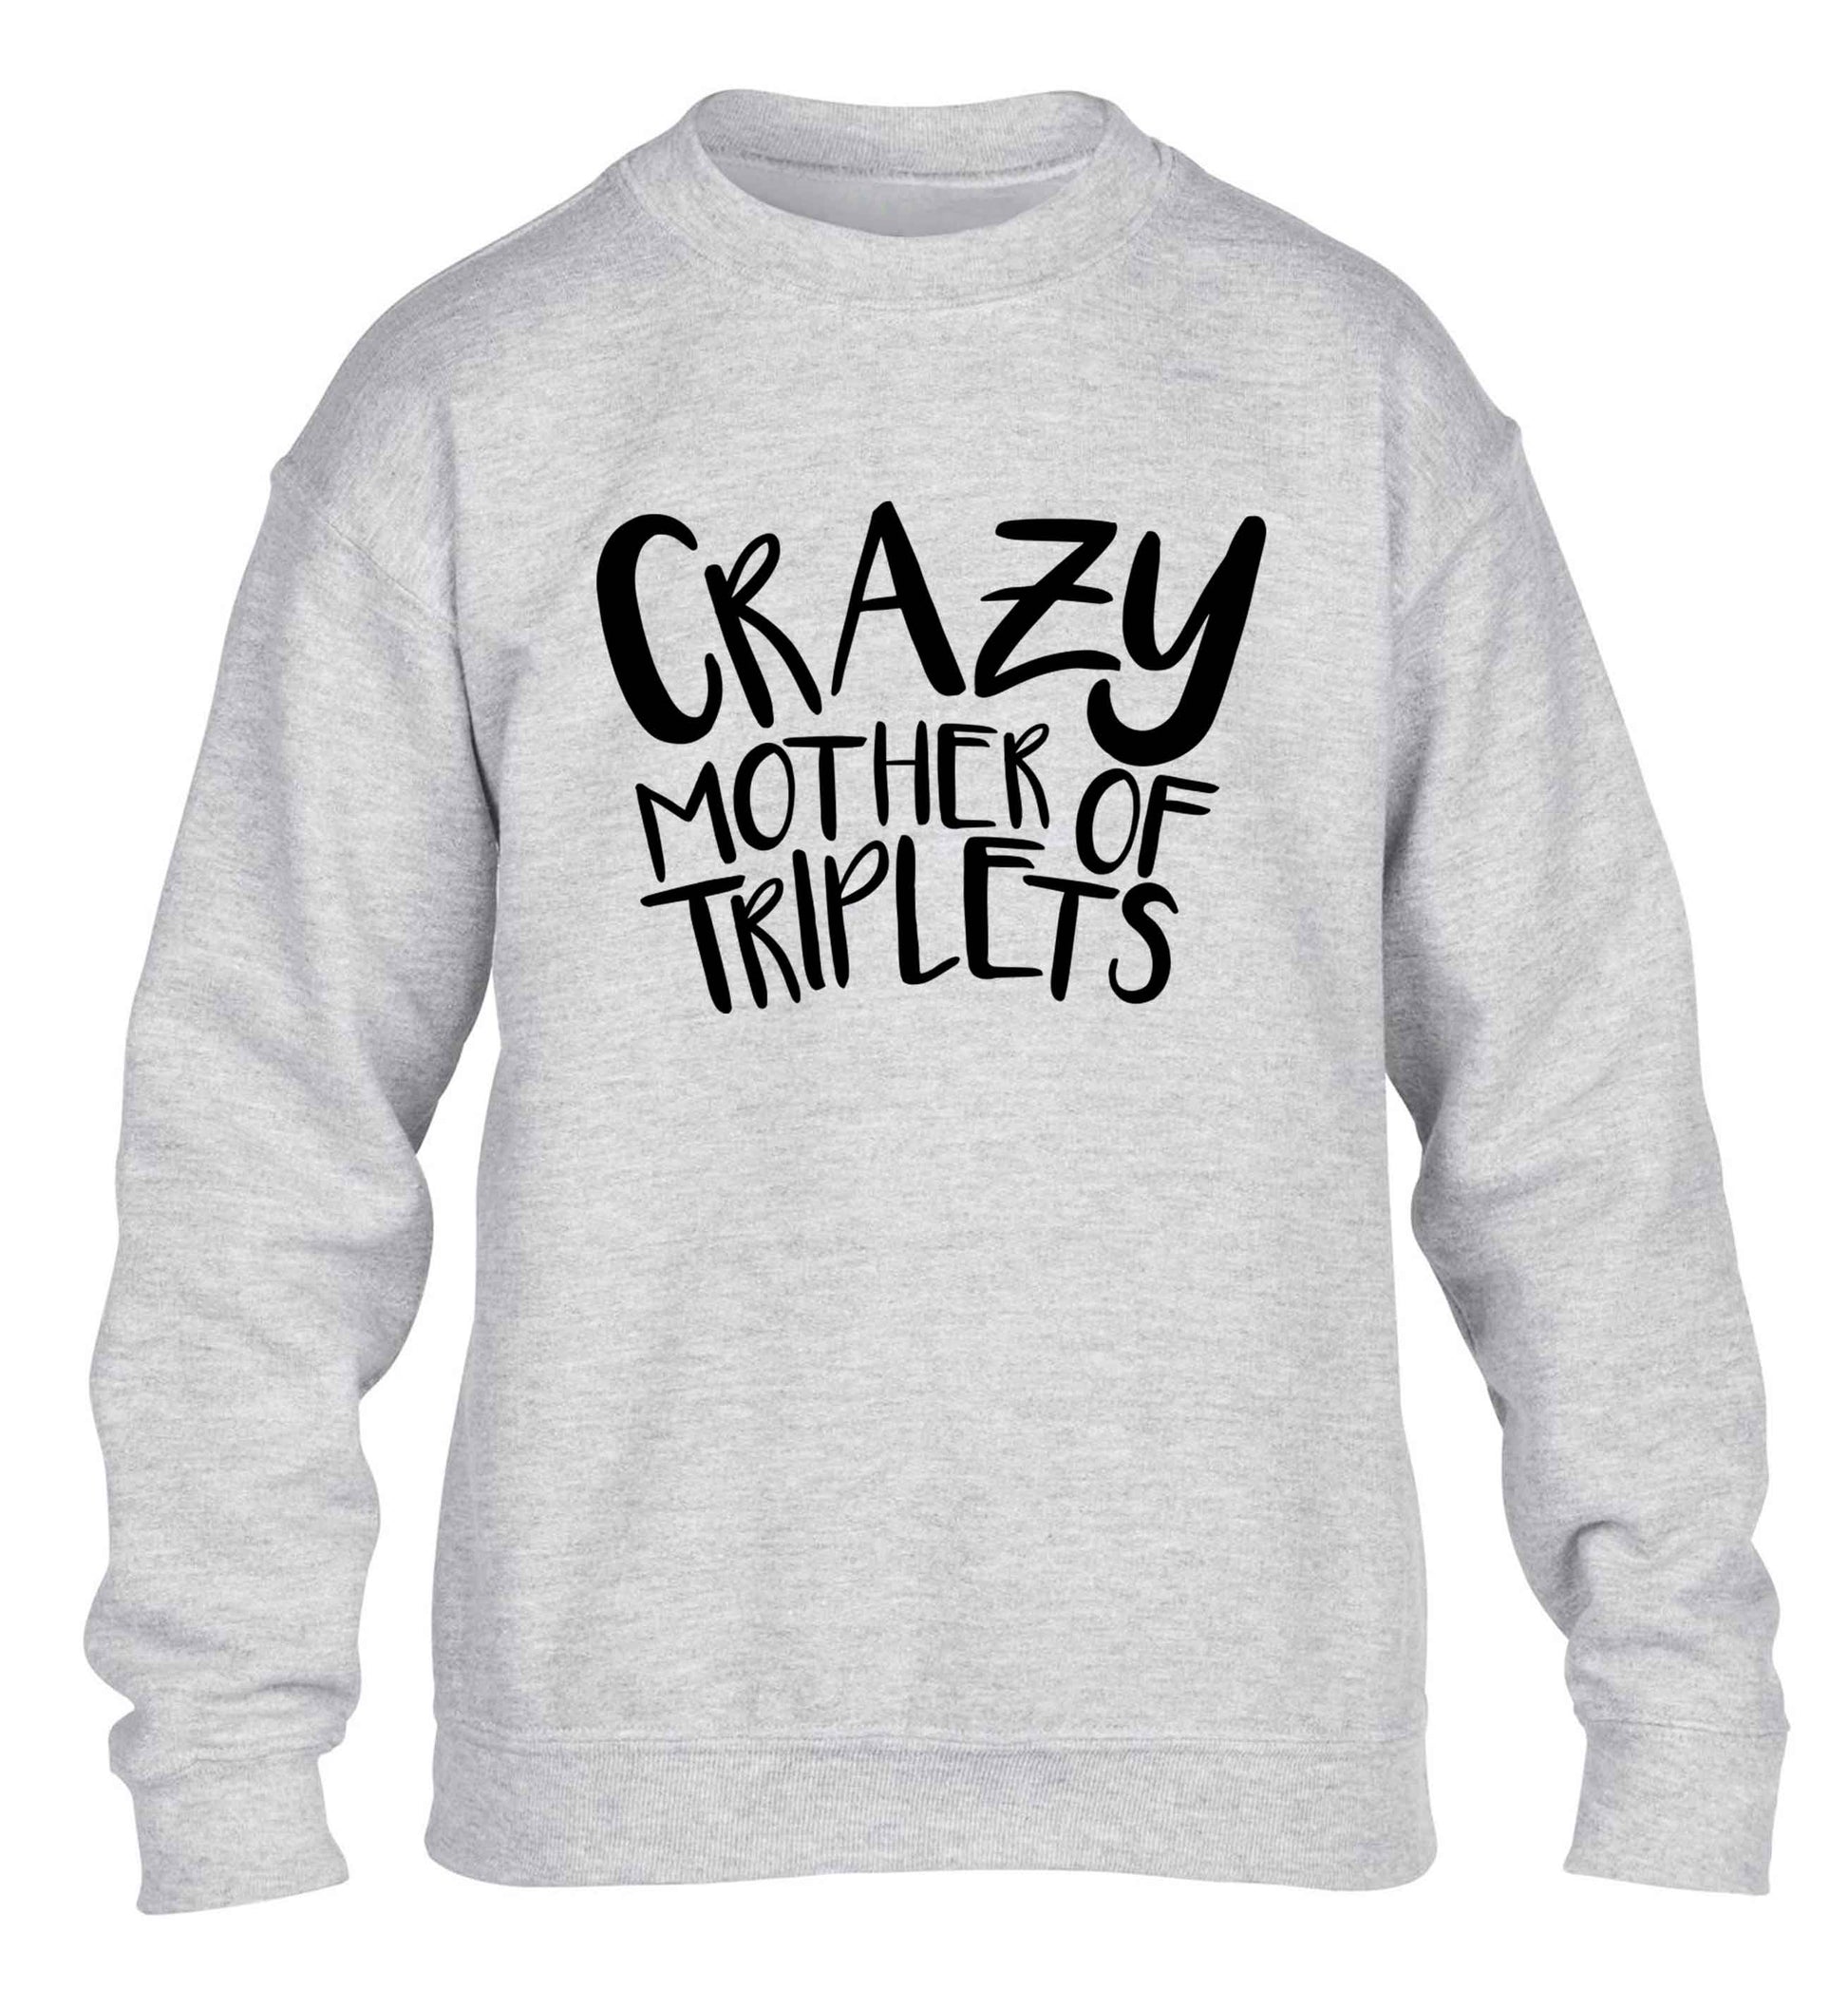 Crazy mother of triplets children's grey sweater 12-13 Years